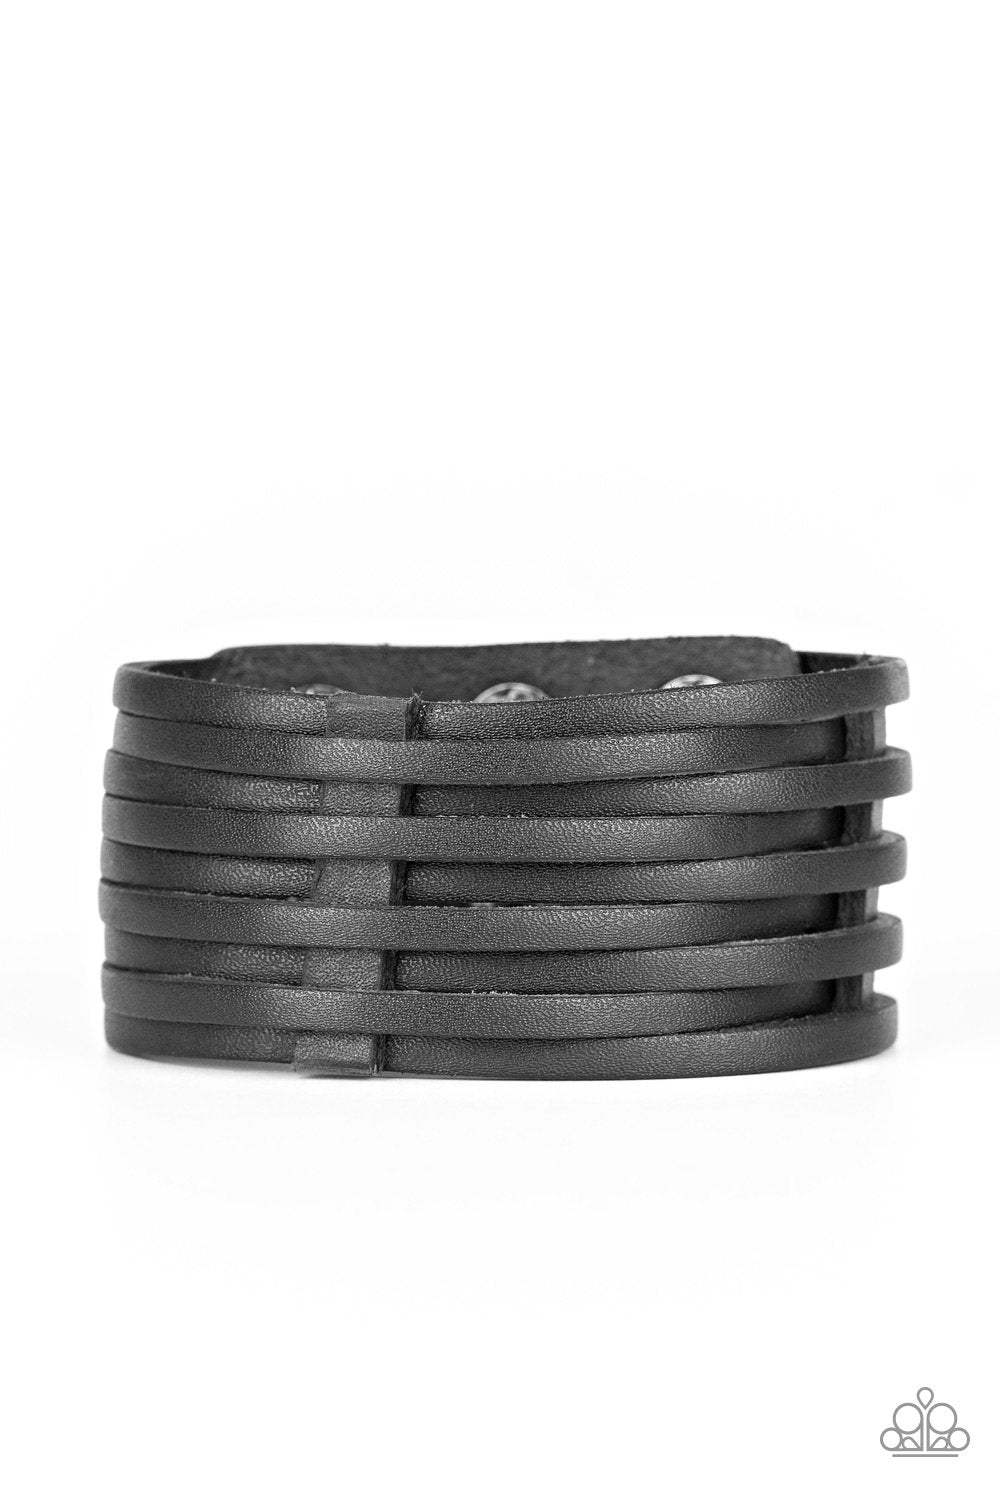 The Starting Lineup Men&#39;s Black Leather Wrap Snap Bracelet - Paparazzi Accessories-CarasShop.com - $5 Jewelry by Cara Jewels